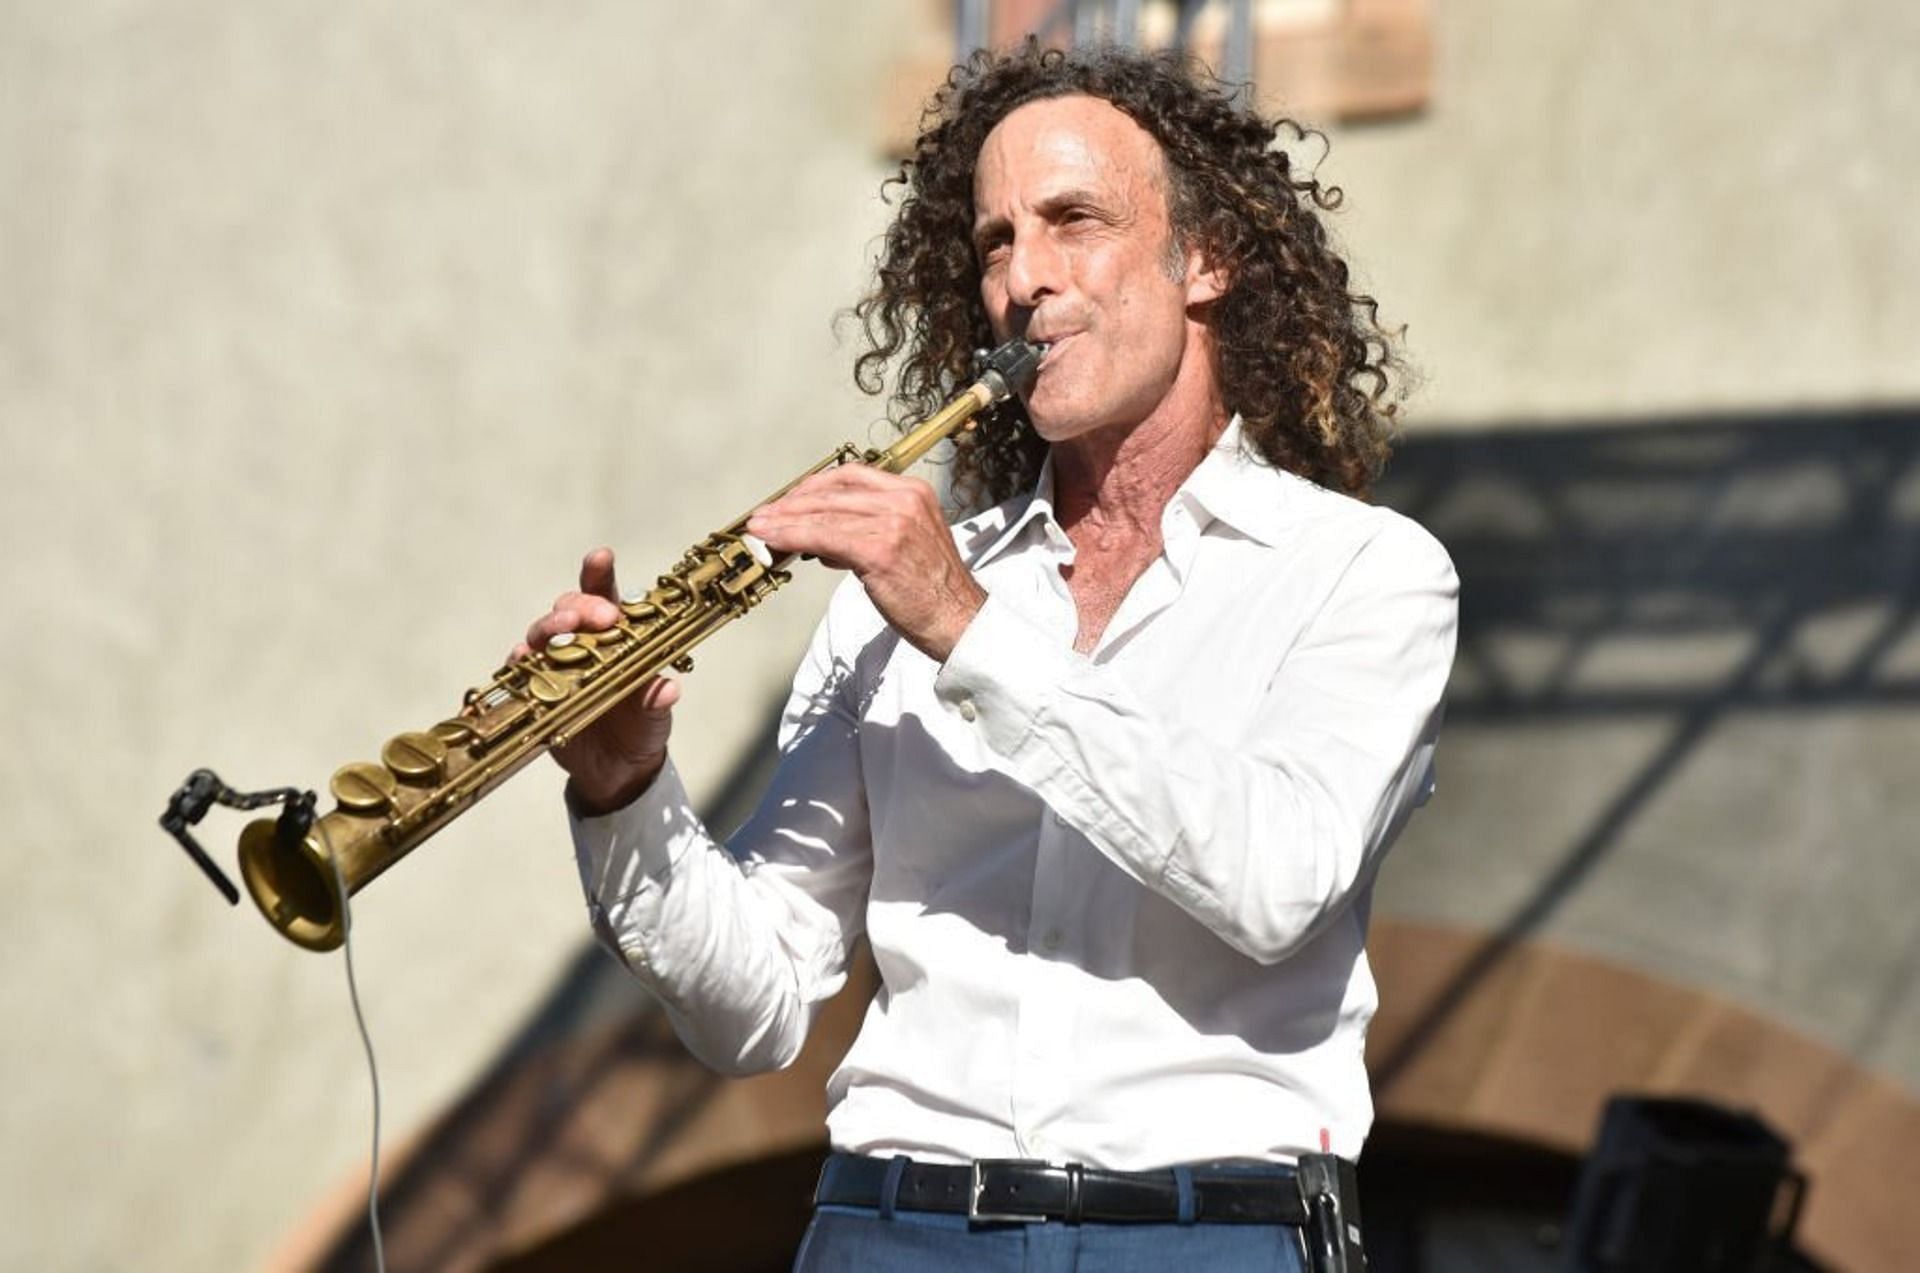 Kenny G has earned a lot from his hit albums and singles (Image via Tim Mosenfelder/Getty Images)